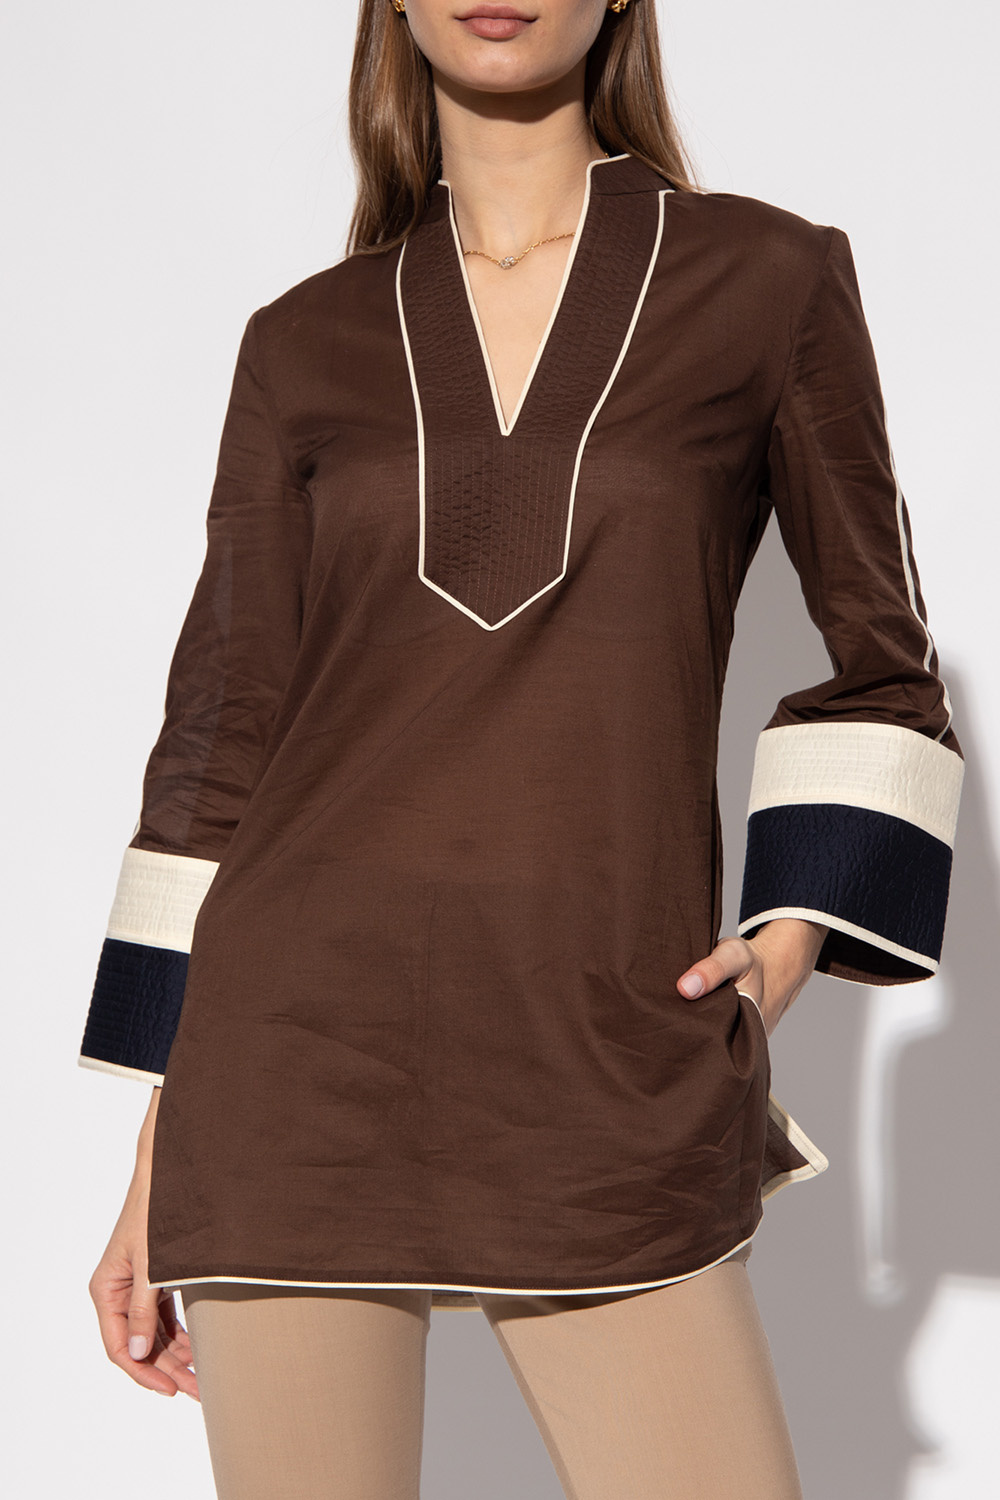 Tory Burch Top with band collar